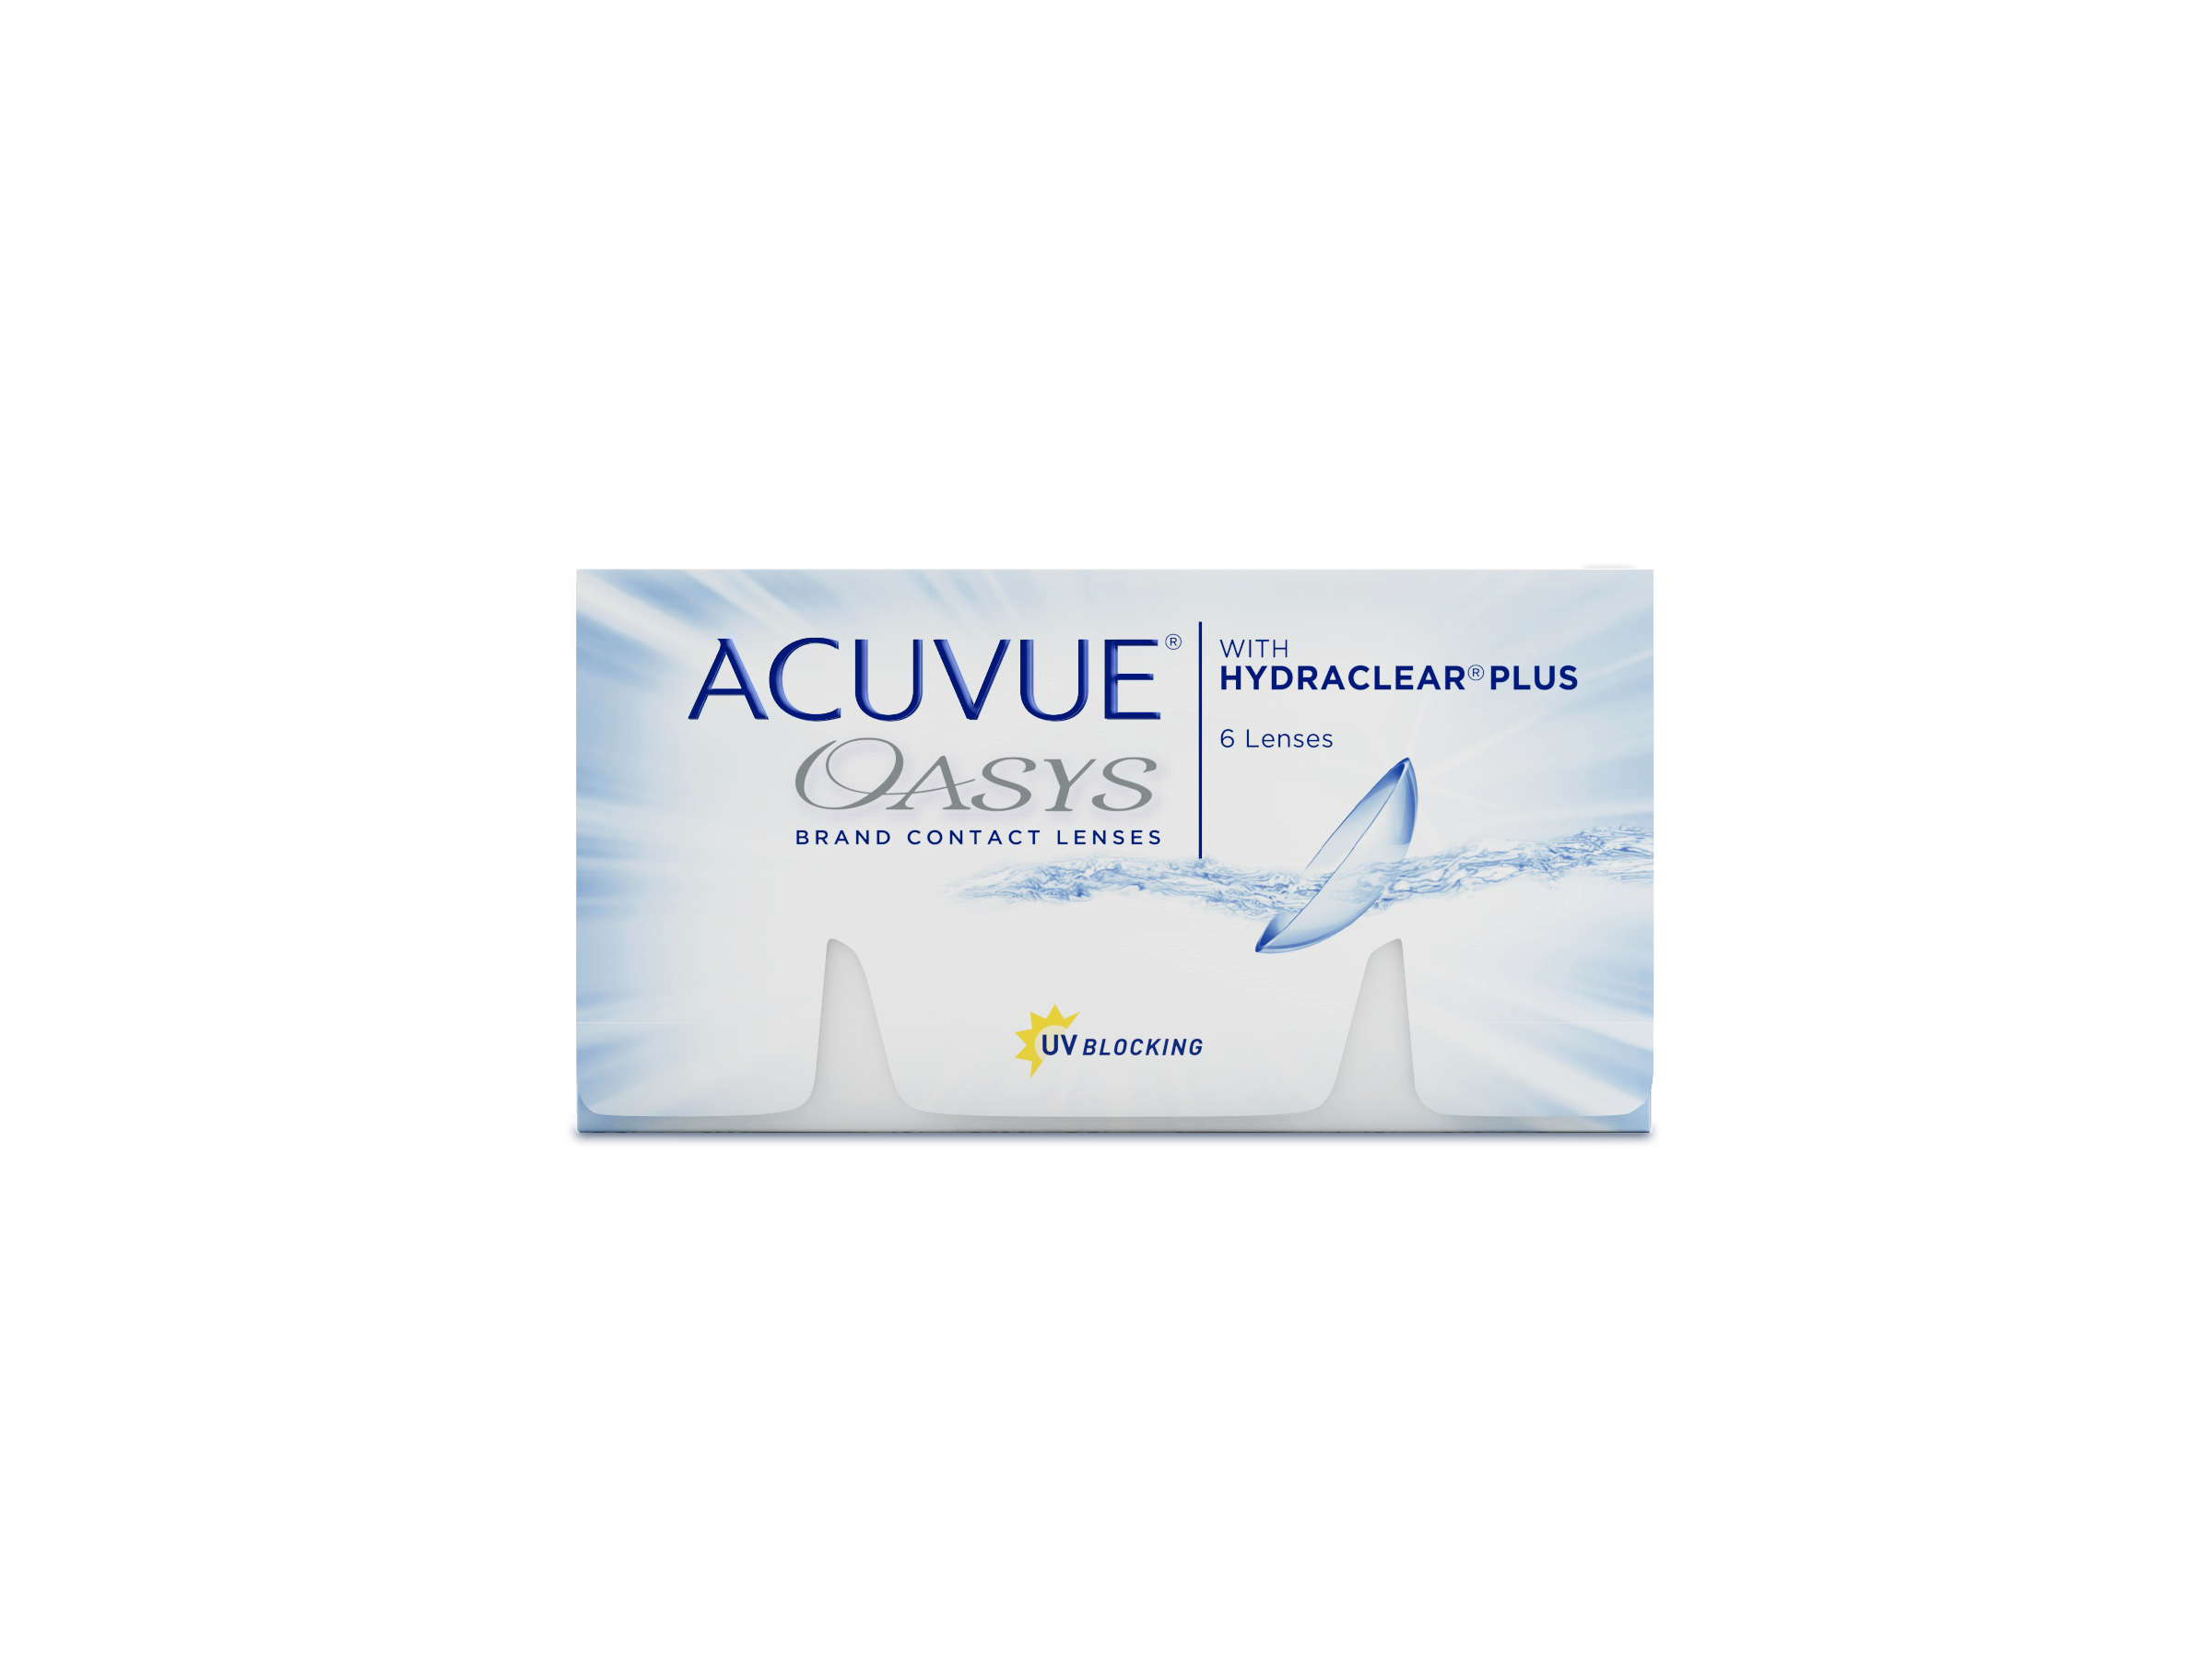 Foto einer Packung ACUVUE® OASYS mit HYDRACLEAR® PLUS-Technologie